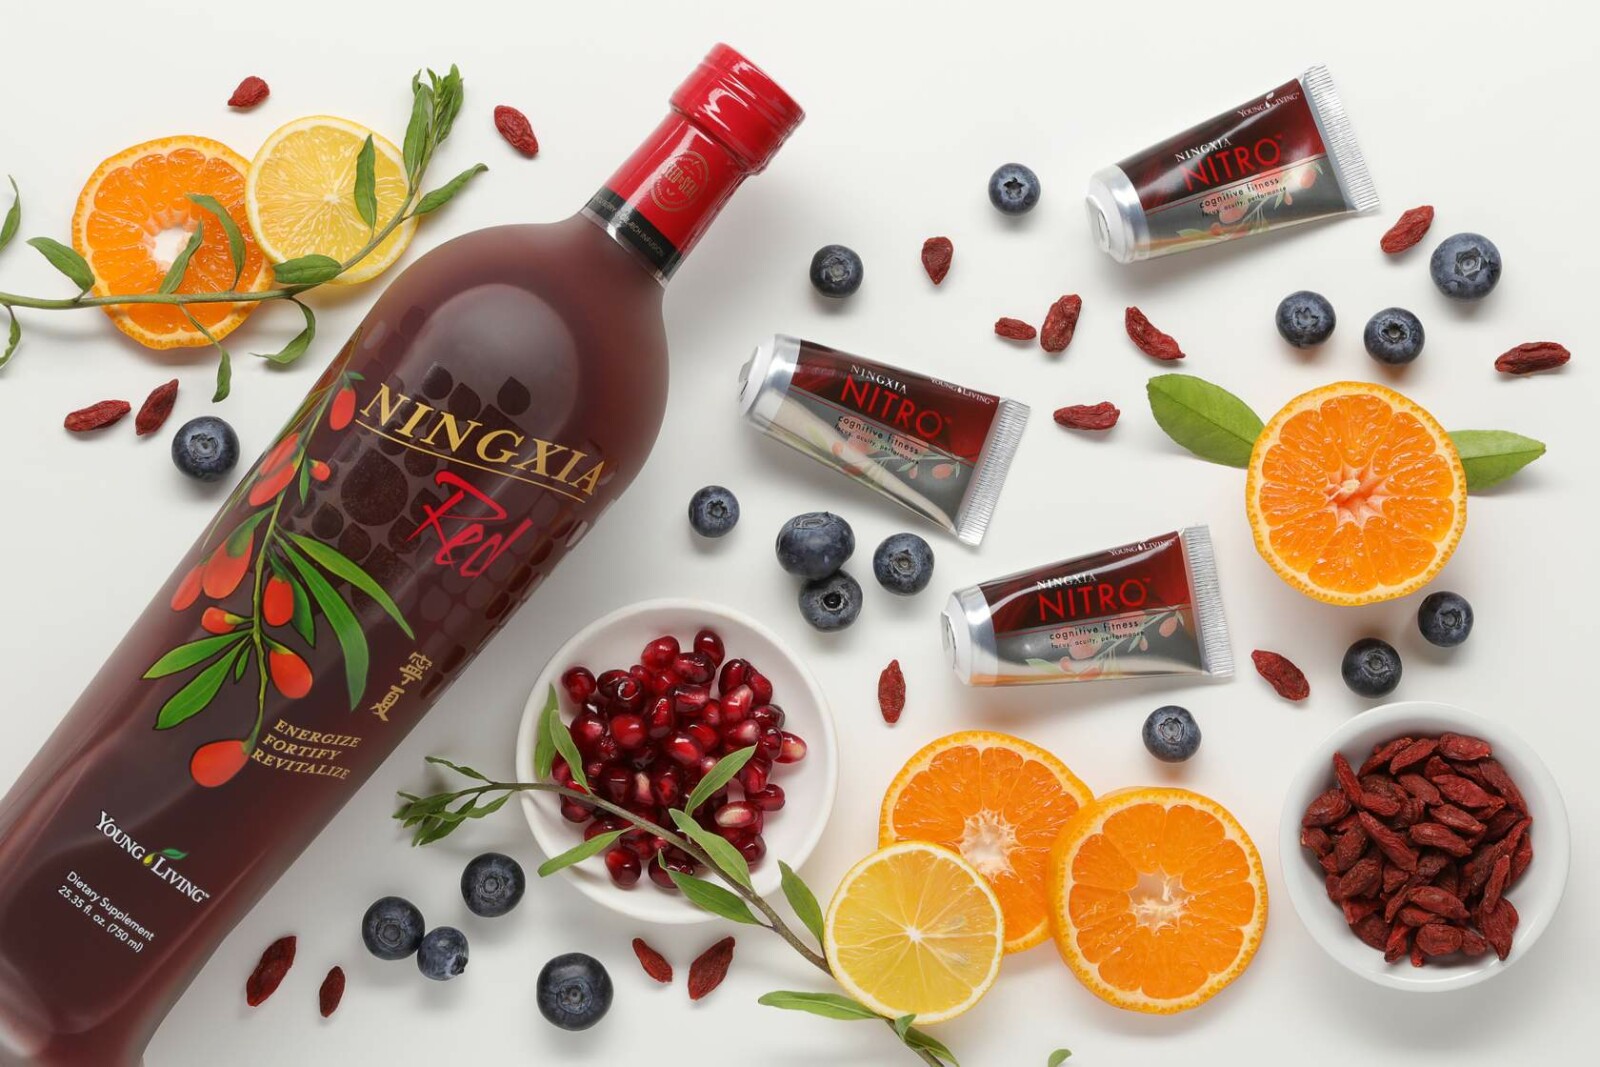 But, 'What is NingXia Red?' #WellnessWednesday